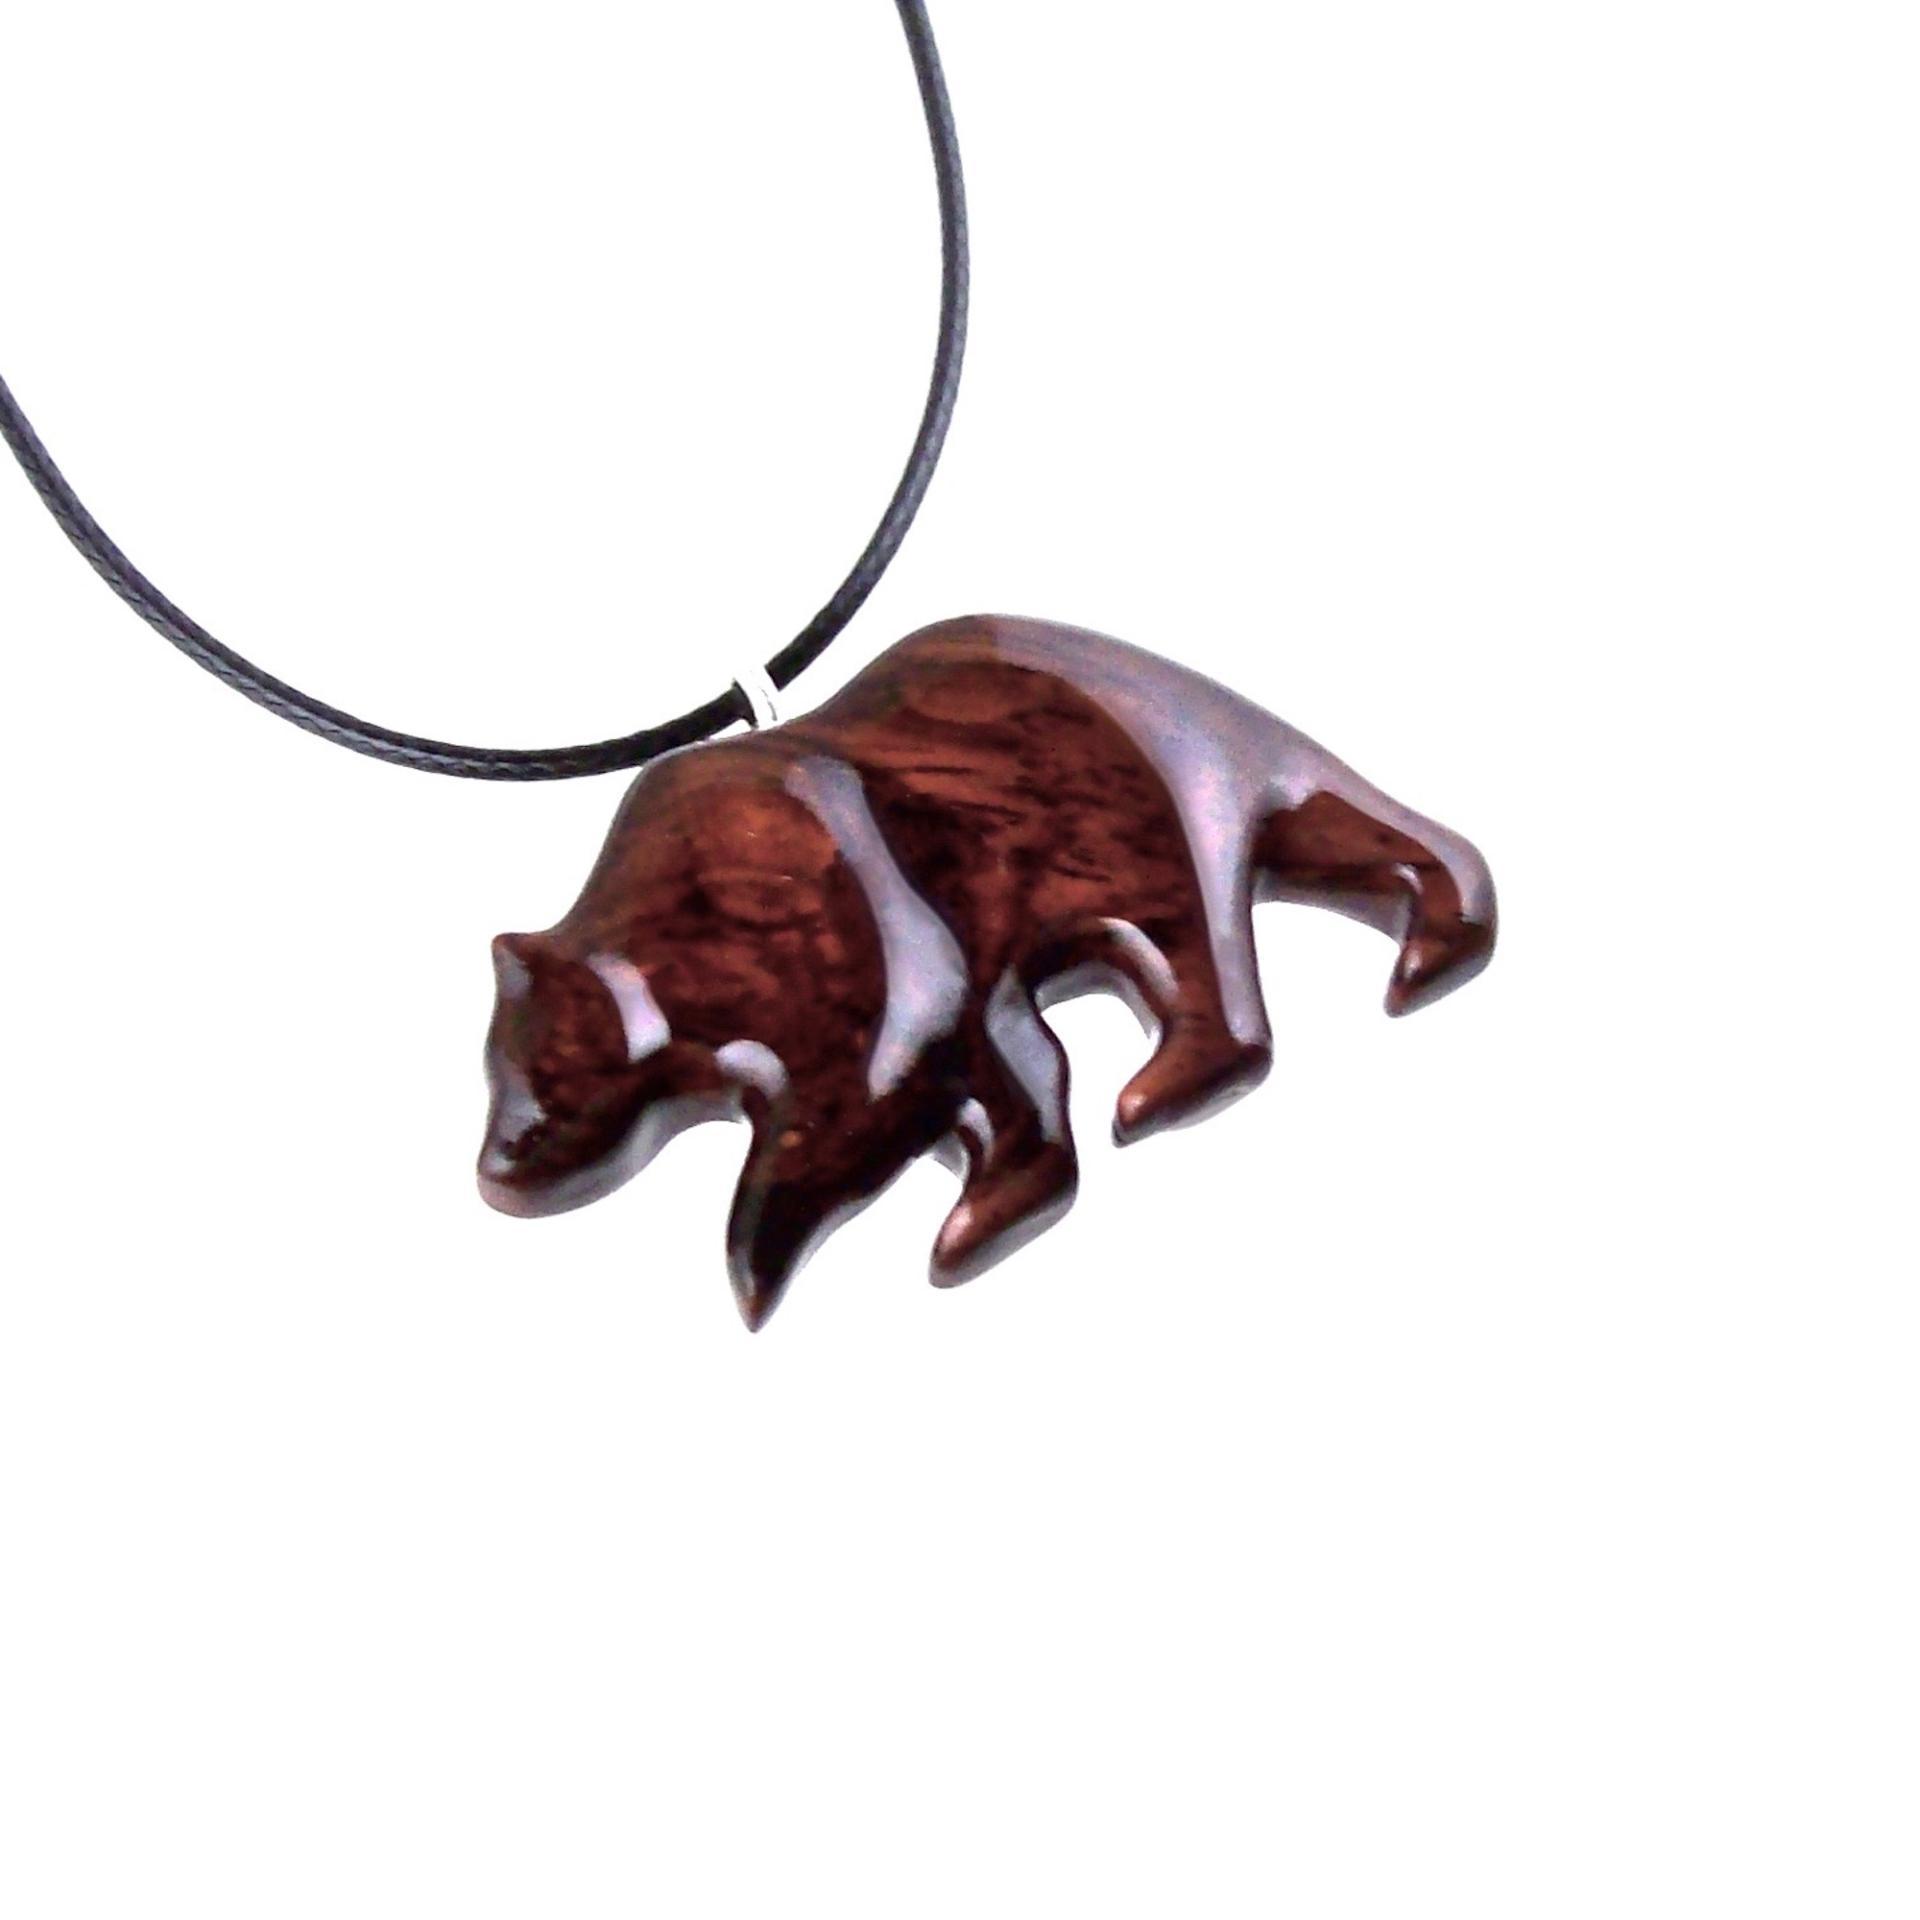 Wood Bear Necklace, Hand Carved Wooden Grizzly Bear Pendant for Men or Women, Spirit Animal Totem Jewelry Gift for Him Her